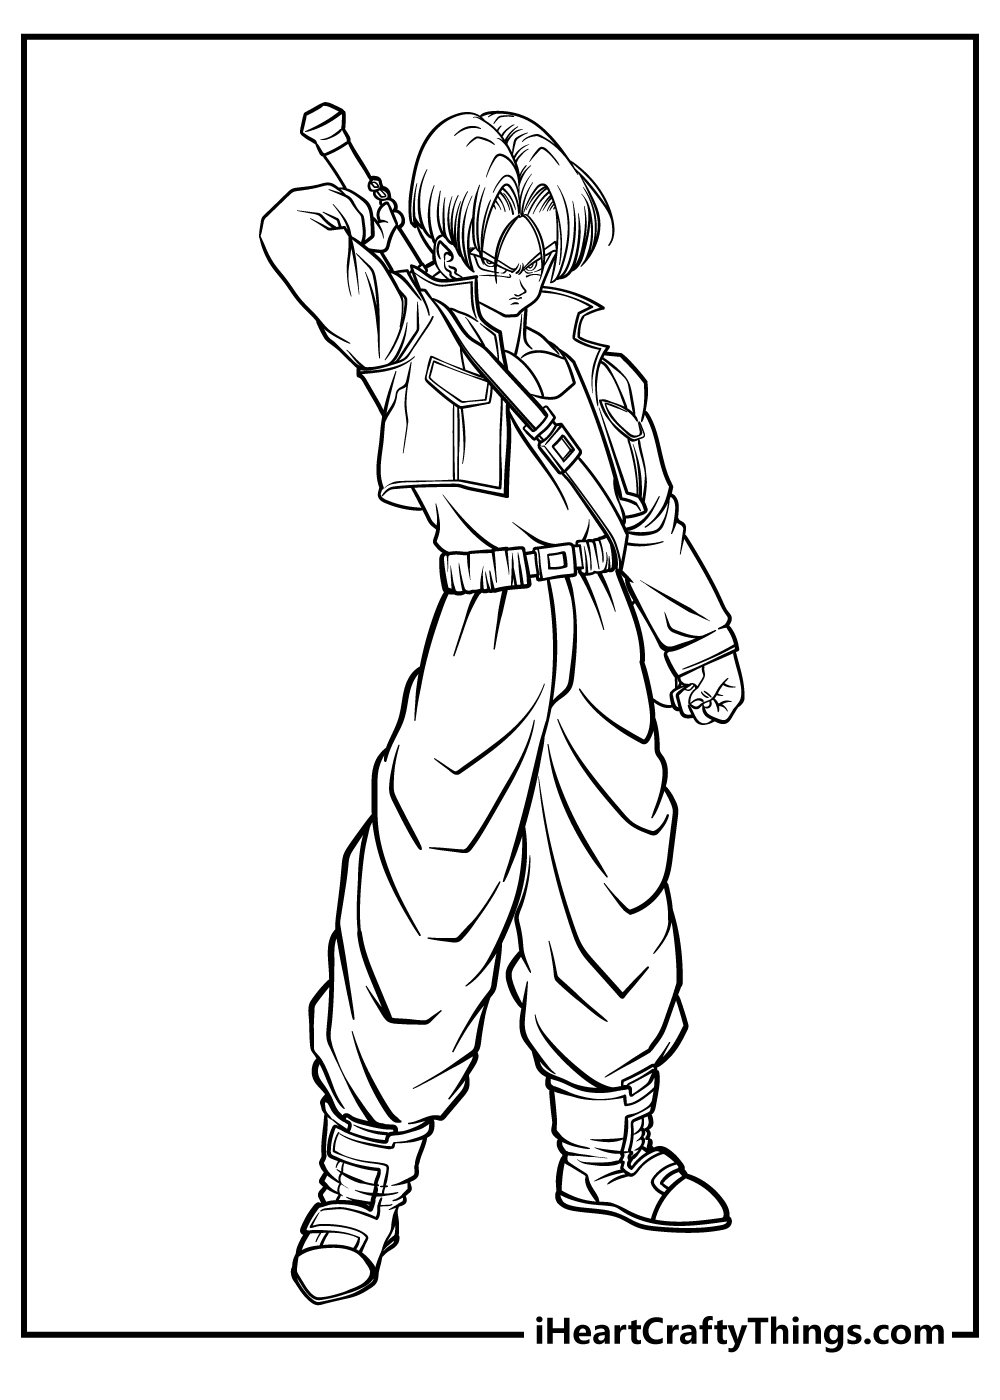 Anime Coloring Pages free download pdf